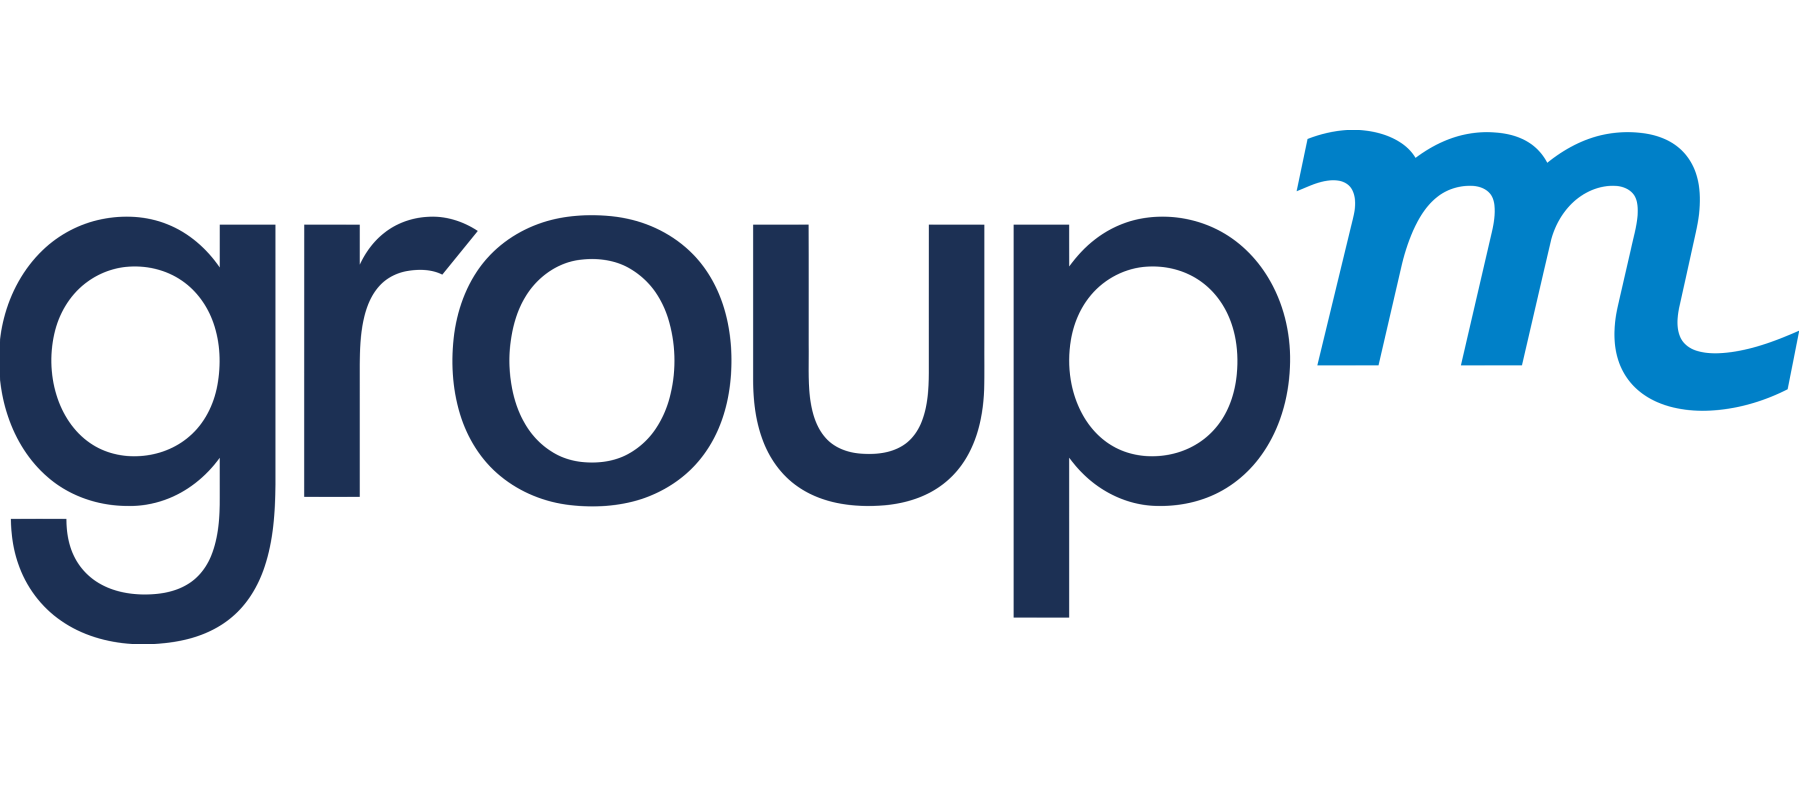 GroupM partners with Amazon Ads to co-develop marketing cloud maturity framework for advertisers